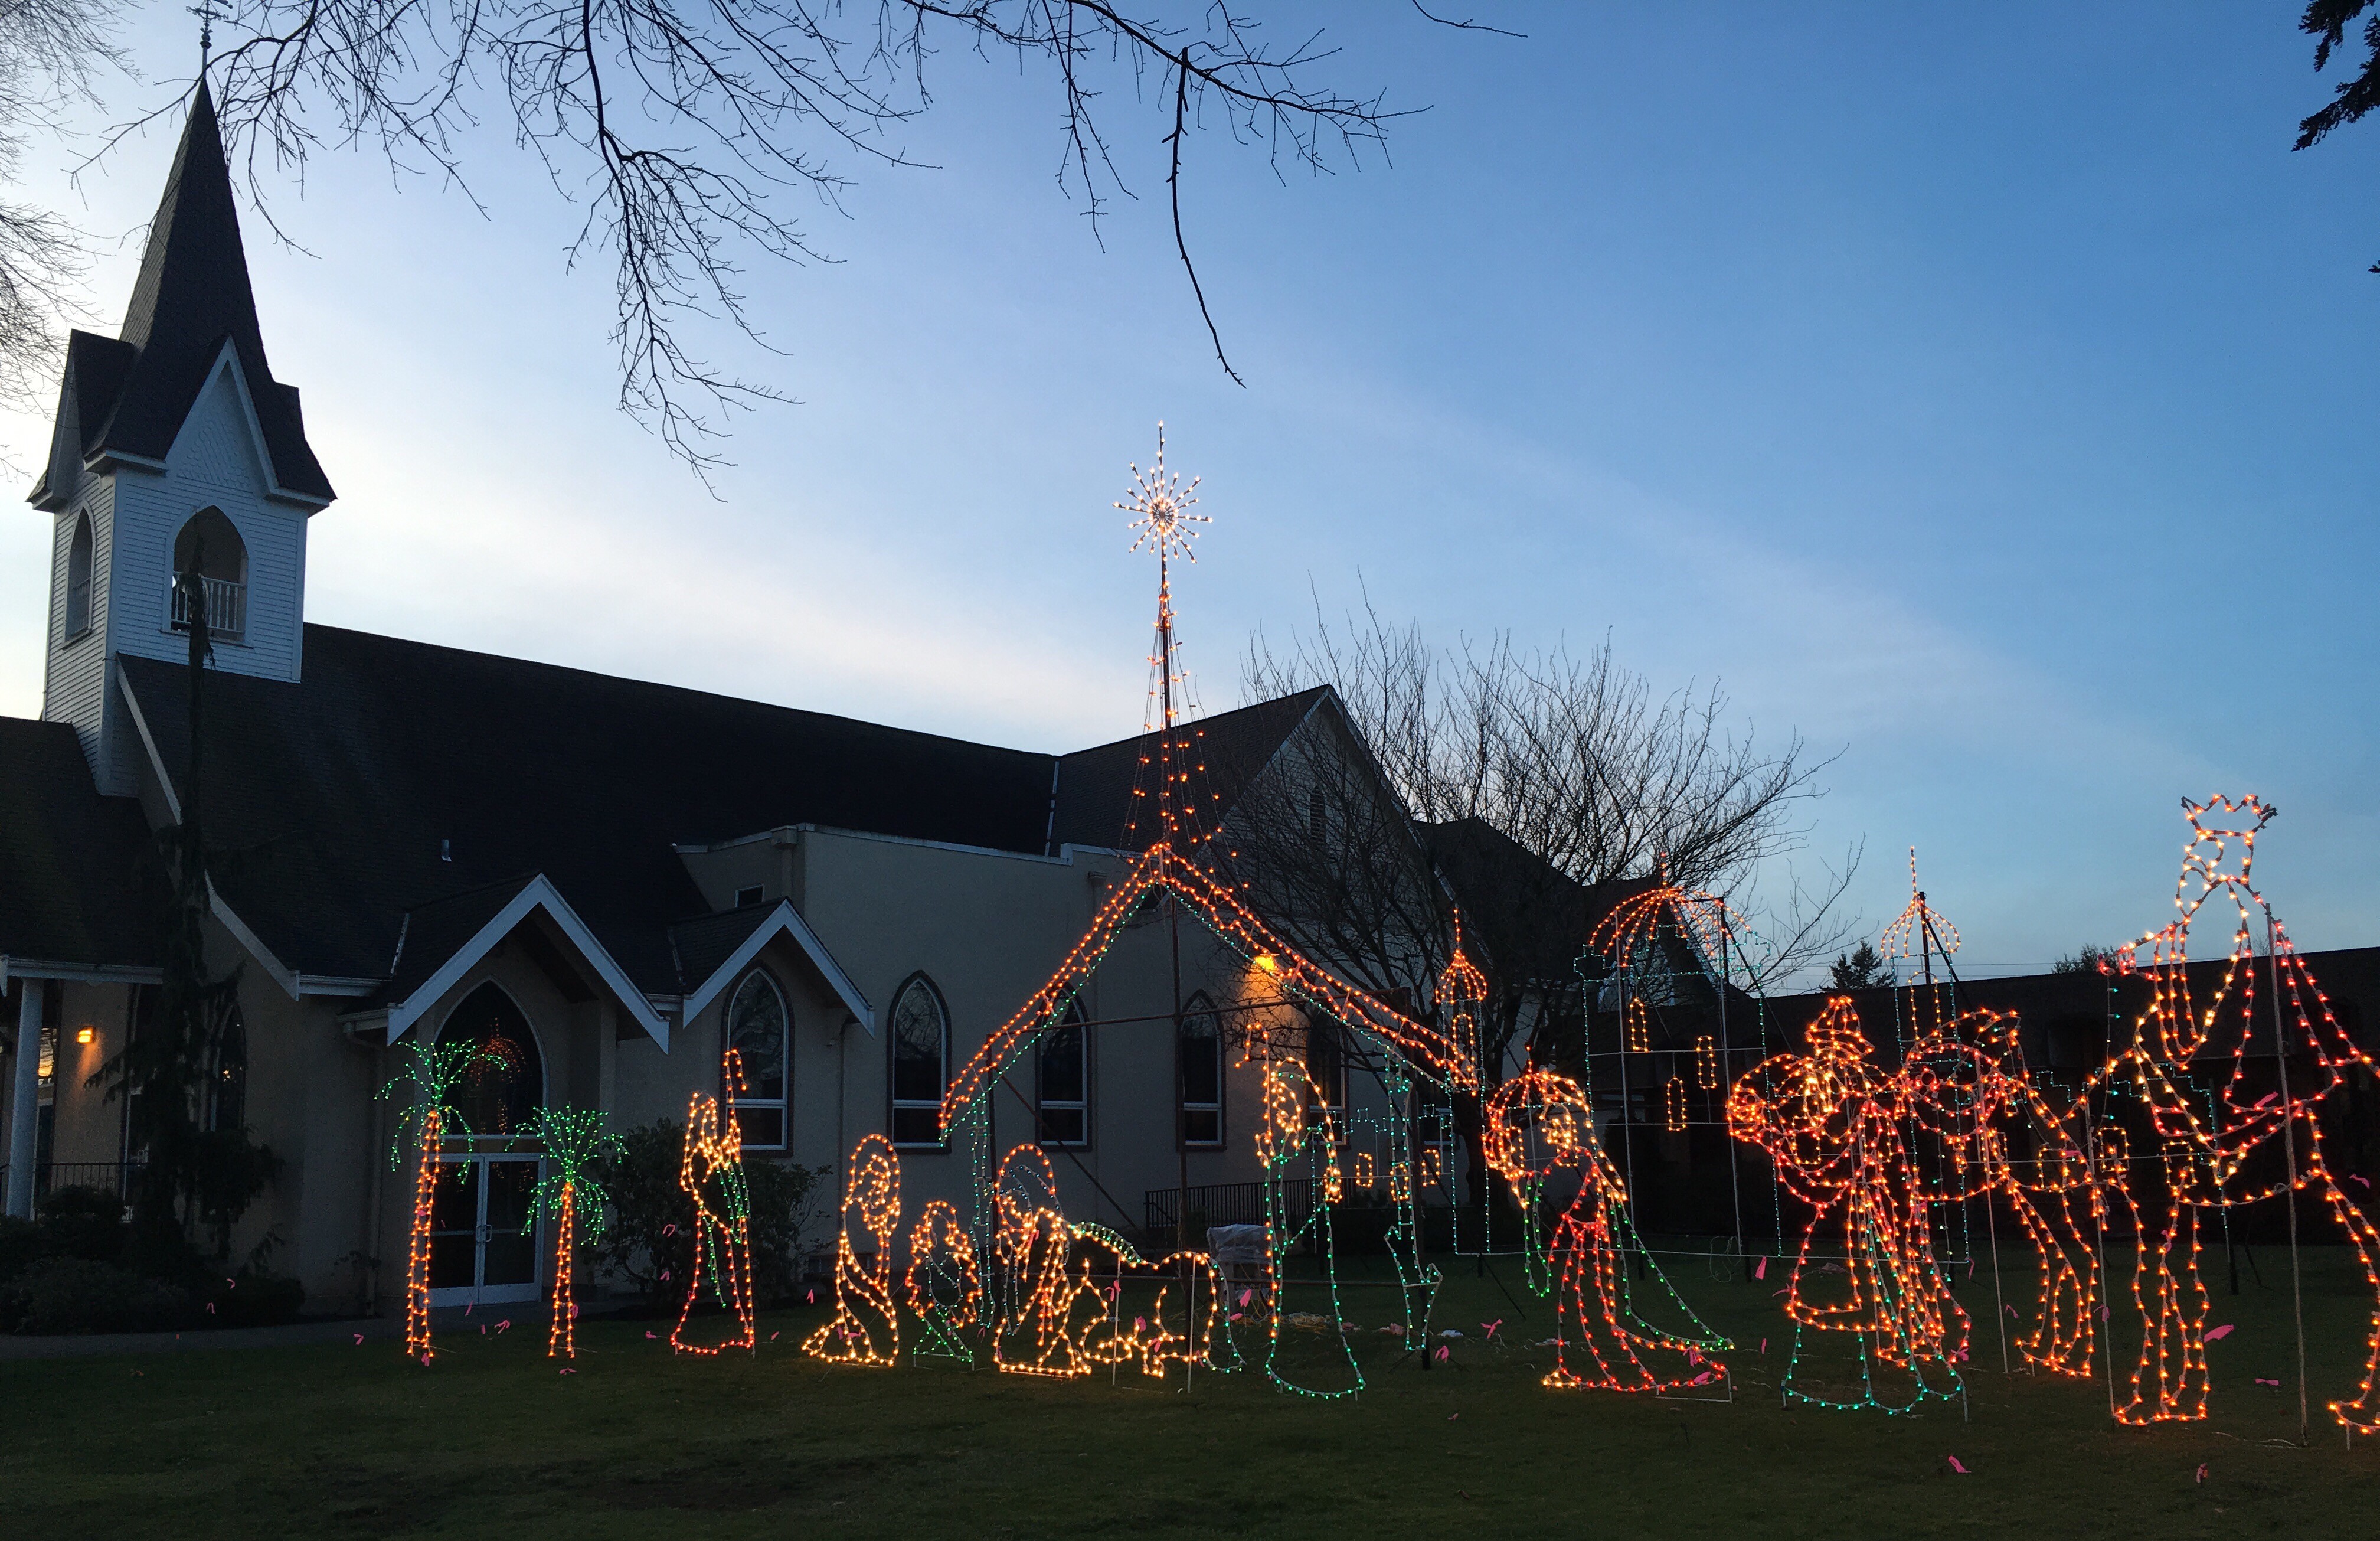 Lighted Nativity Scene at First Christian Reformed Church in Lynden.